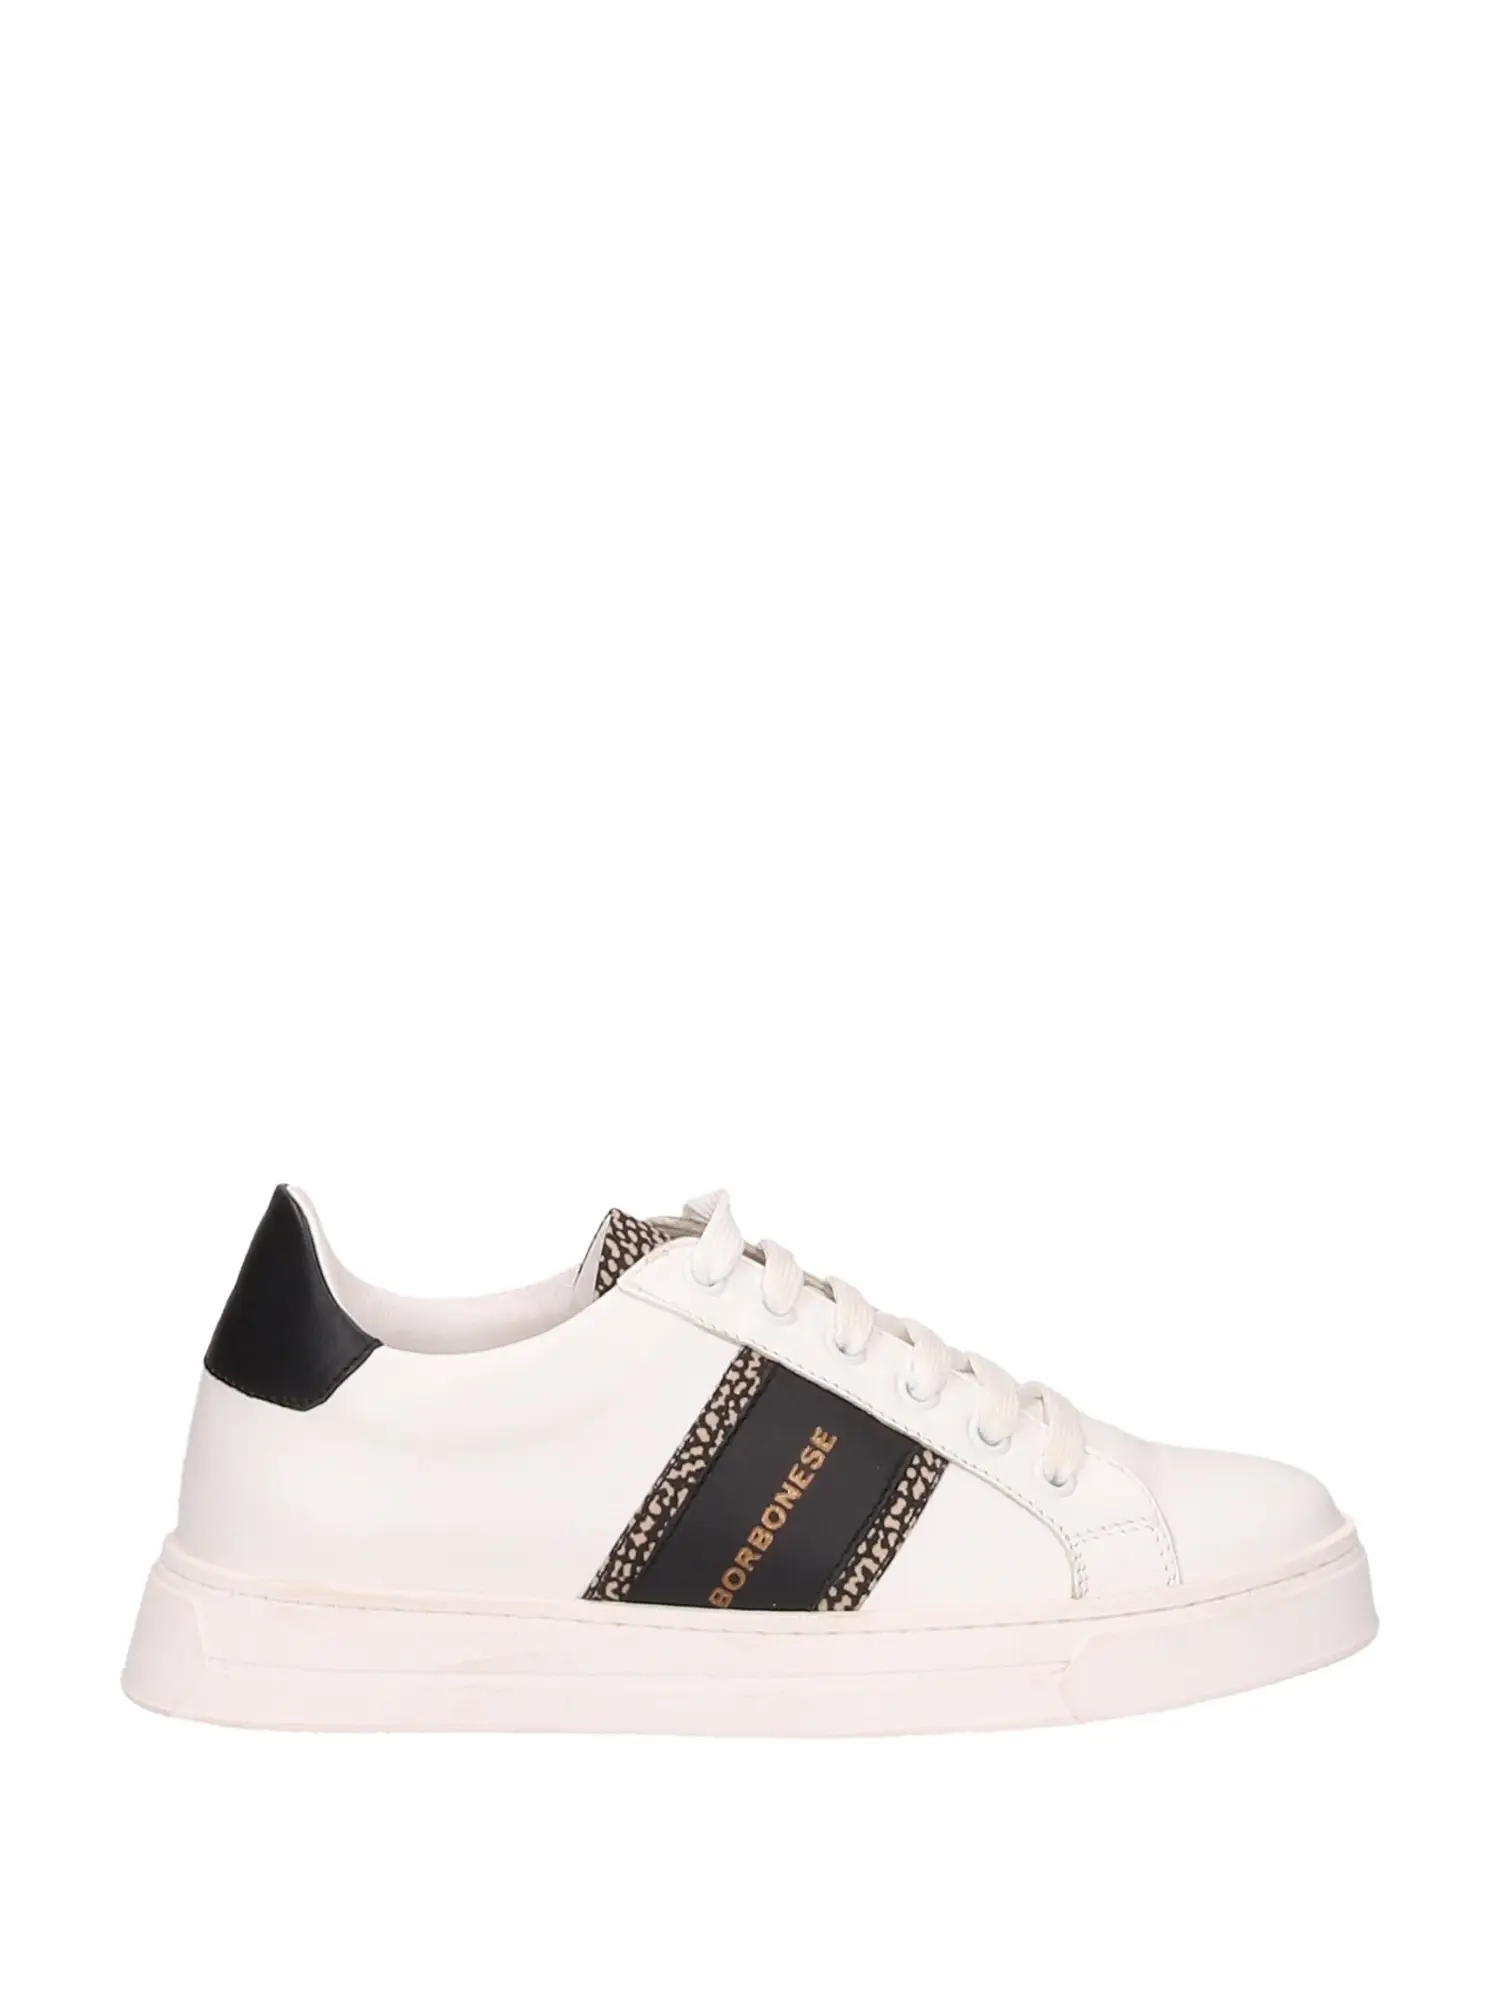 SNEAKERS DONNA - BORBONESE - 6DX902 - BIANCO, 39